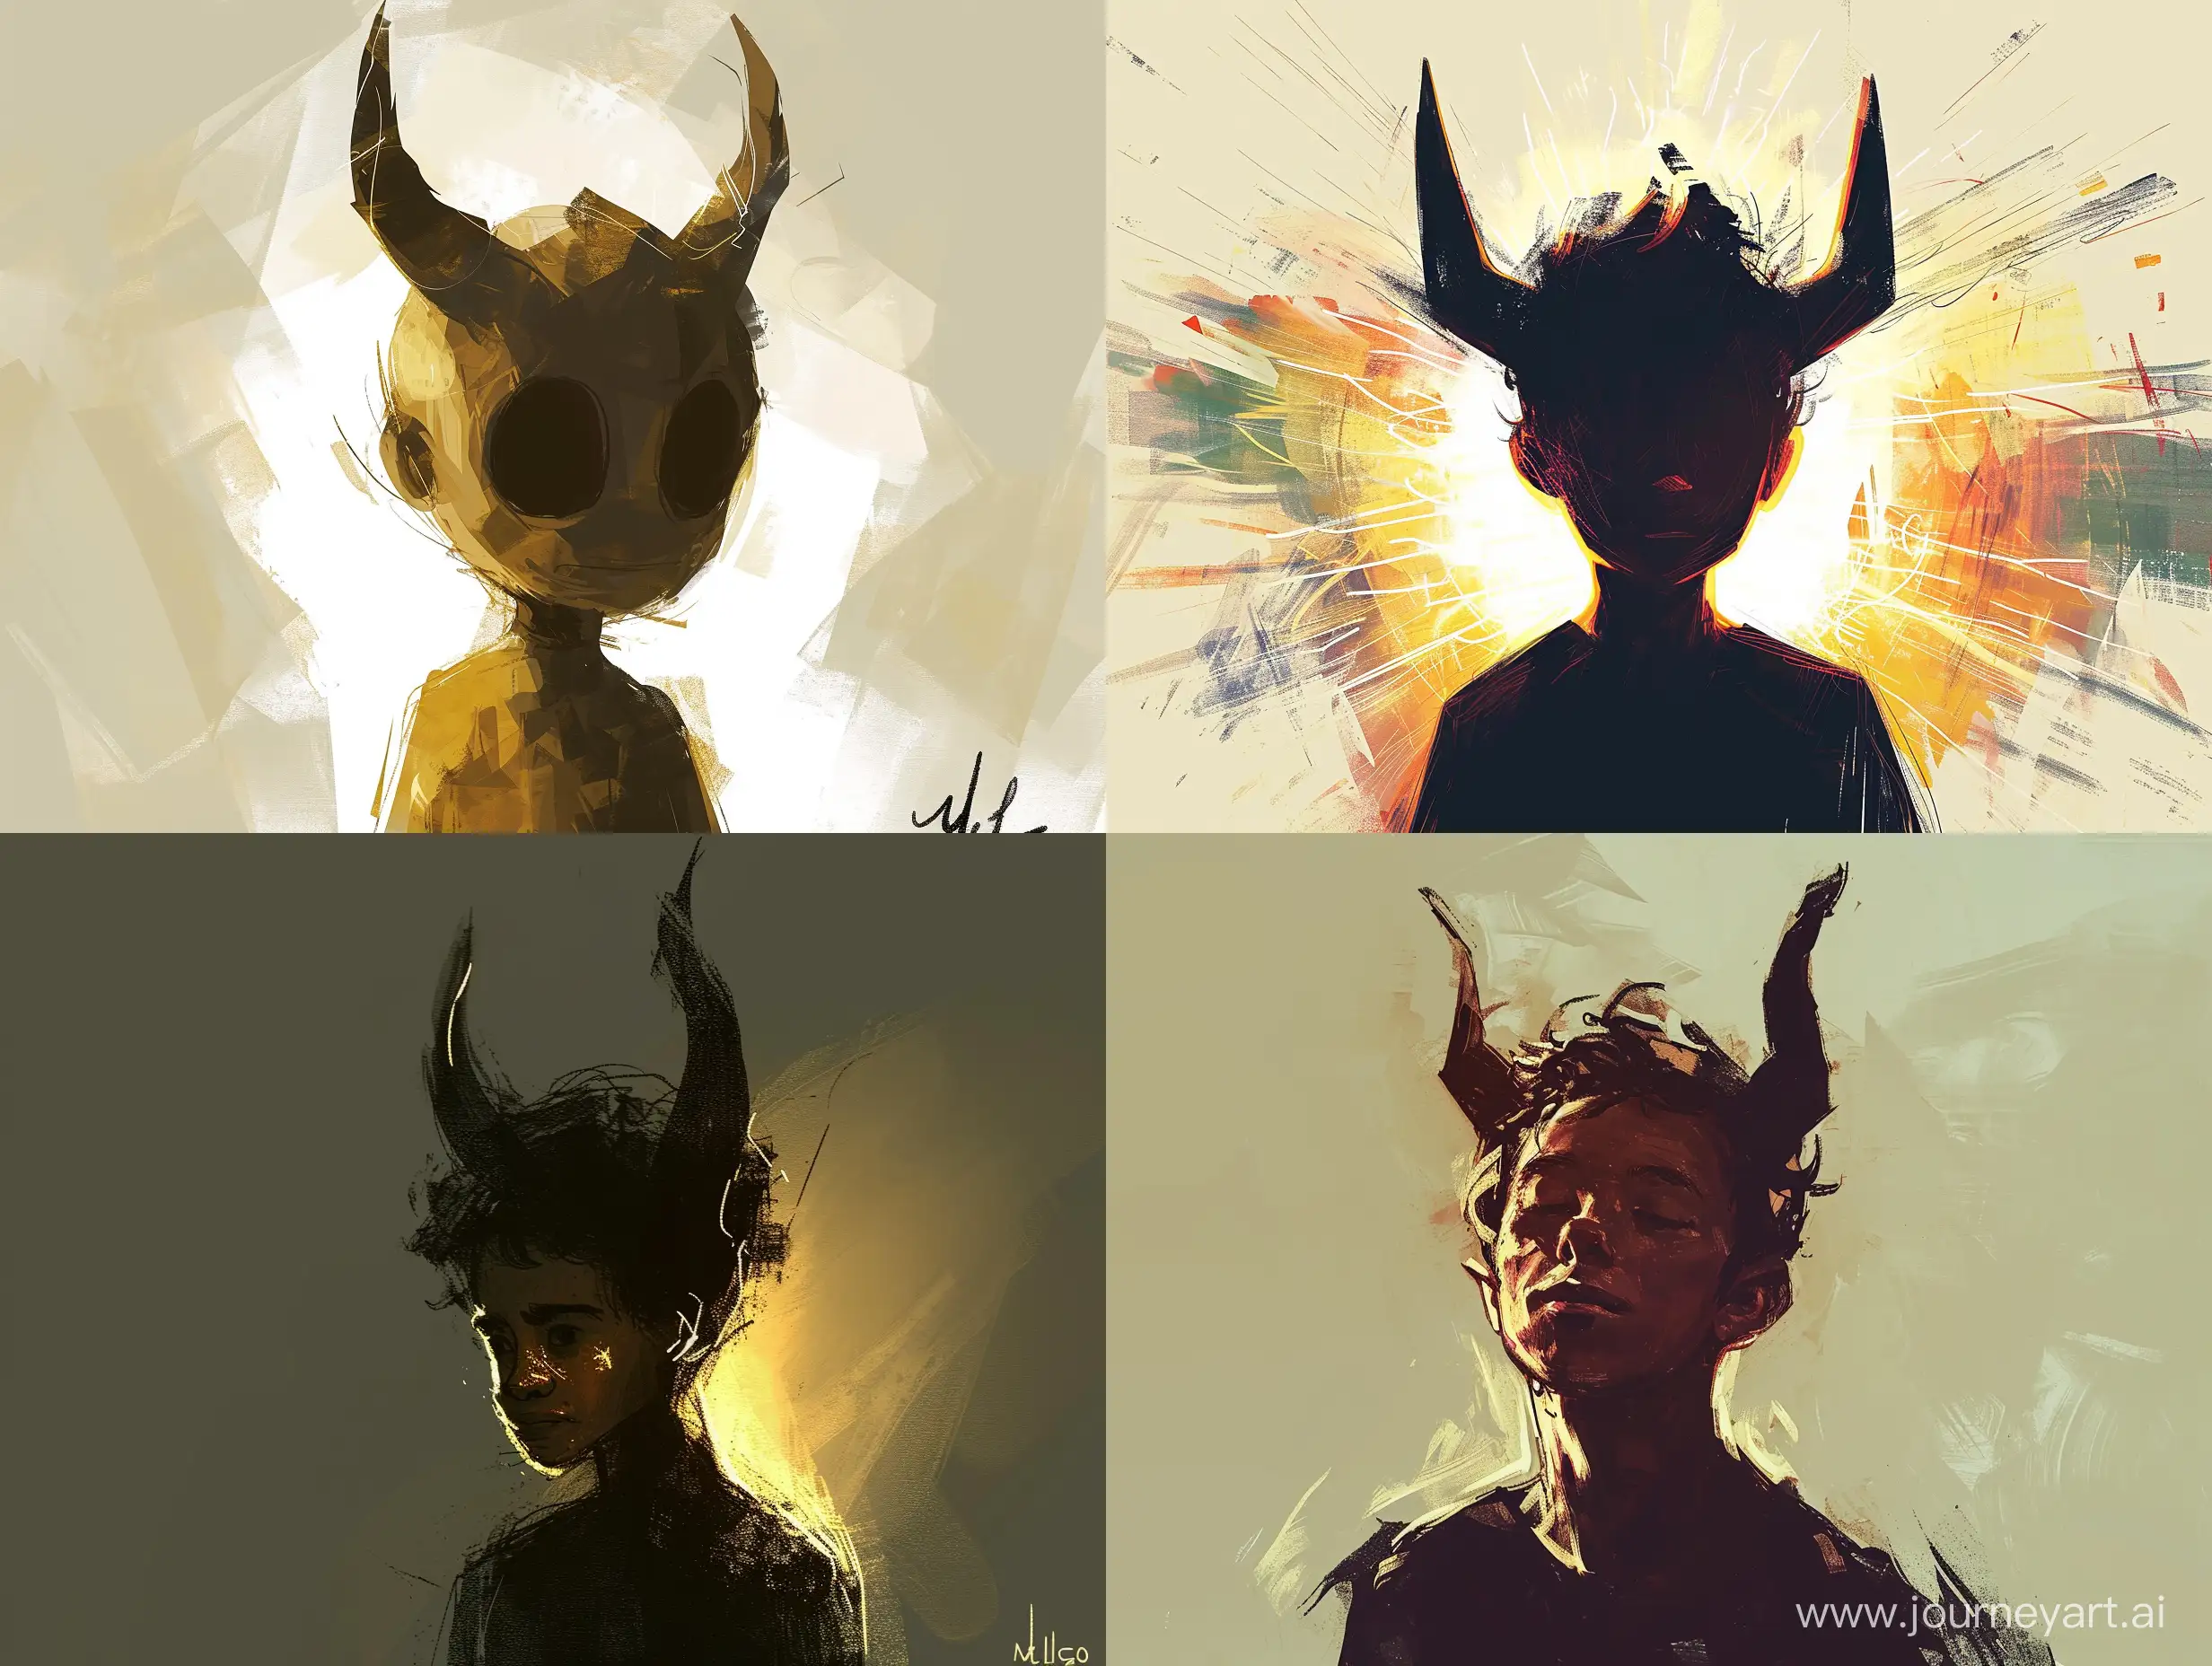 Chromatic-Silhouette-with-Horns-Stylized-Alberto-Mielgo-Inspired-Art